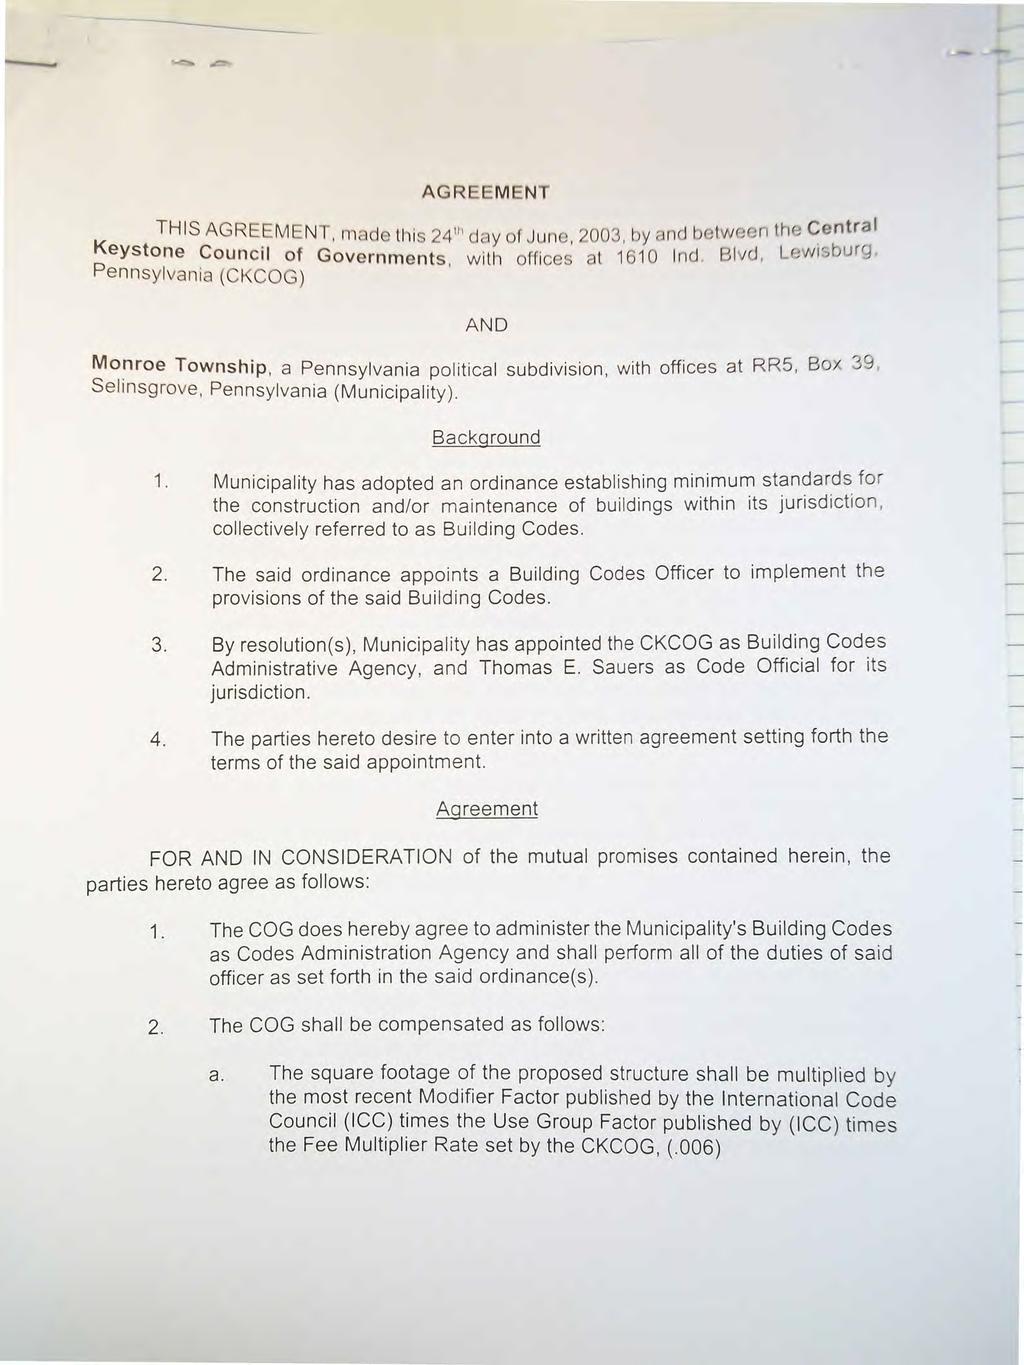 AGREEMENT THIS AGREEMENT, made this 24th day of June, 2003, by and between the Central Keystone Council of Governments with offices at 1610 Ind.